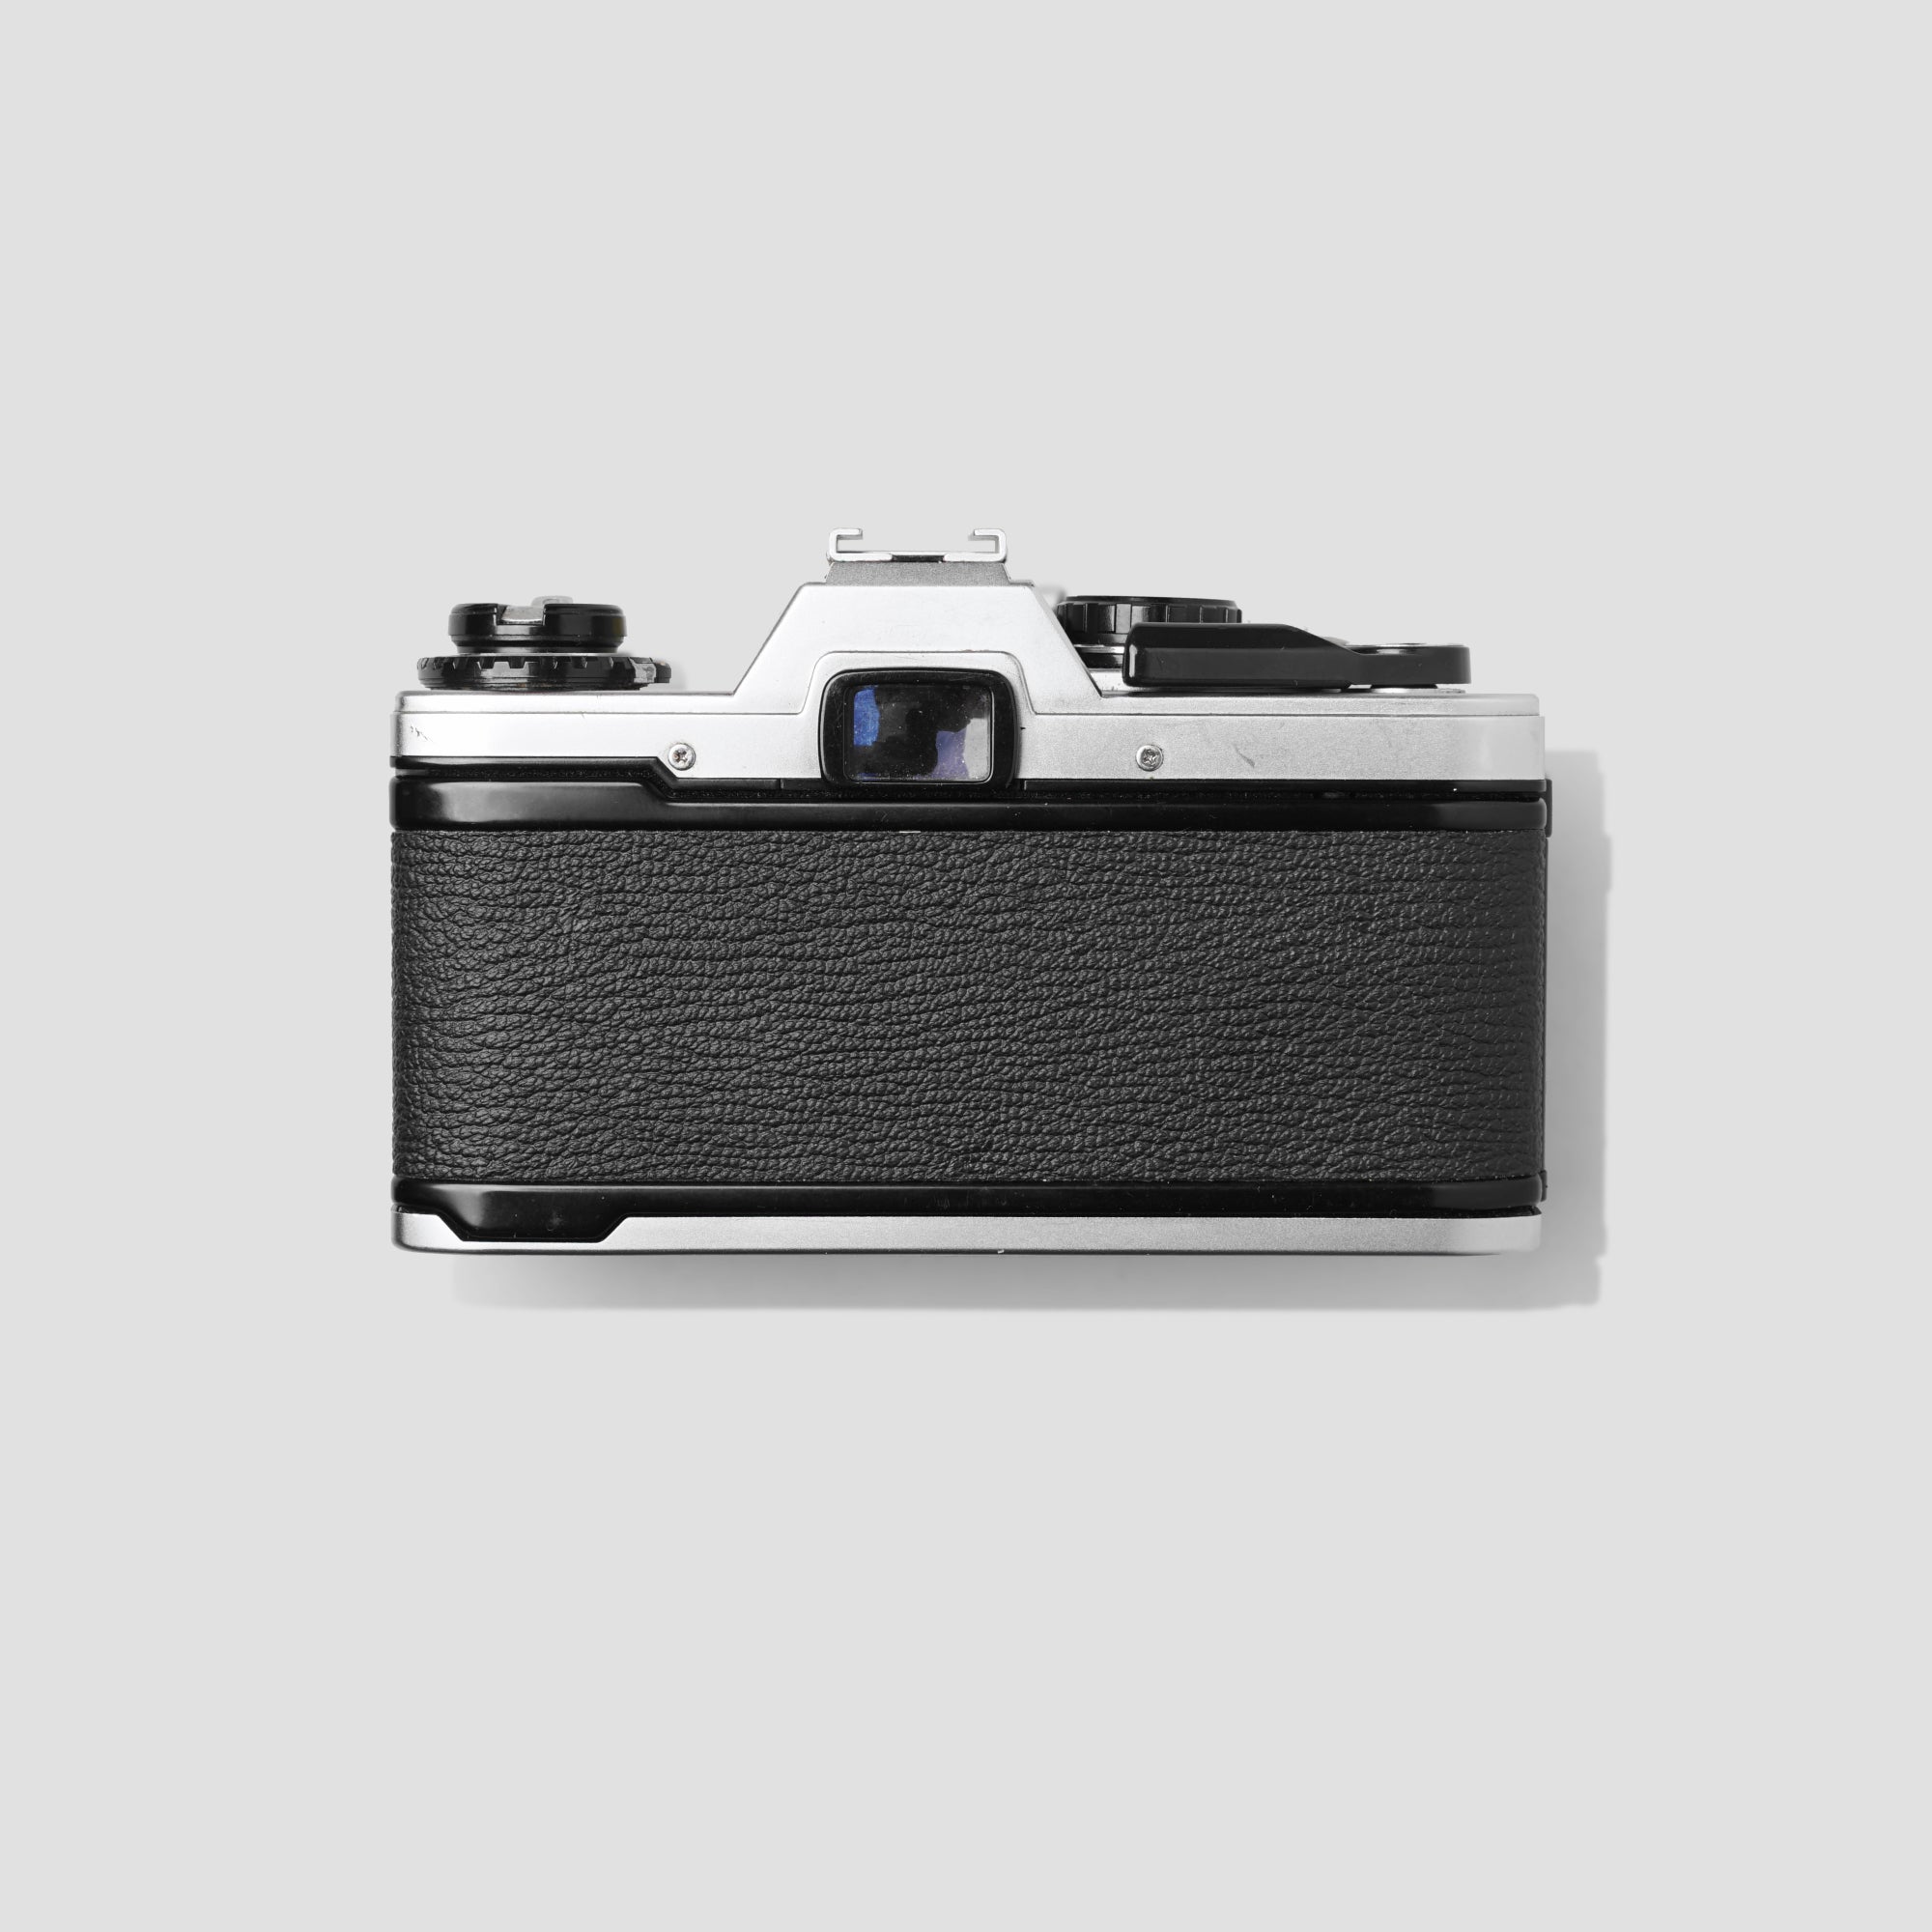 Buy Olympus OM10 now at Analogue Amsterdam